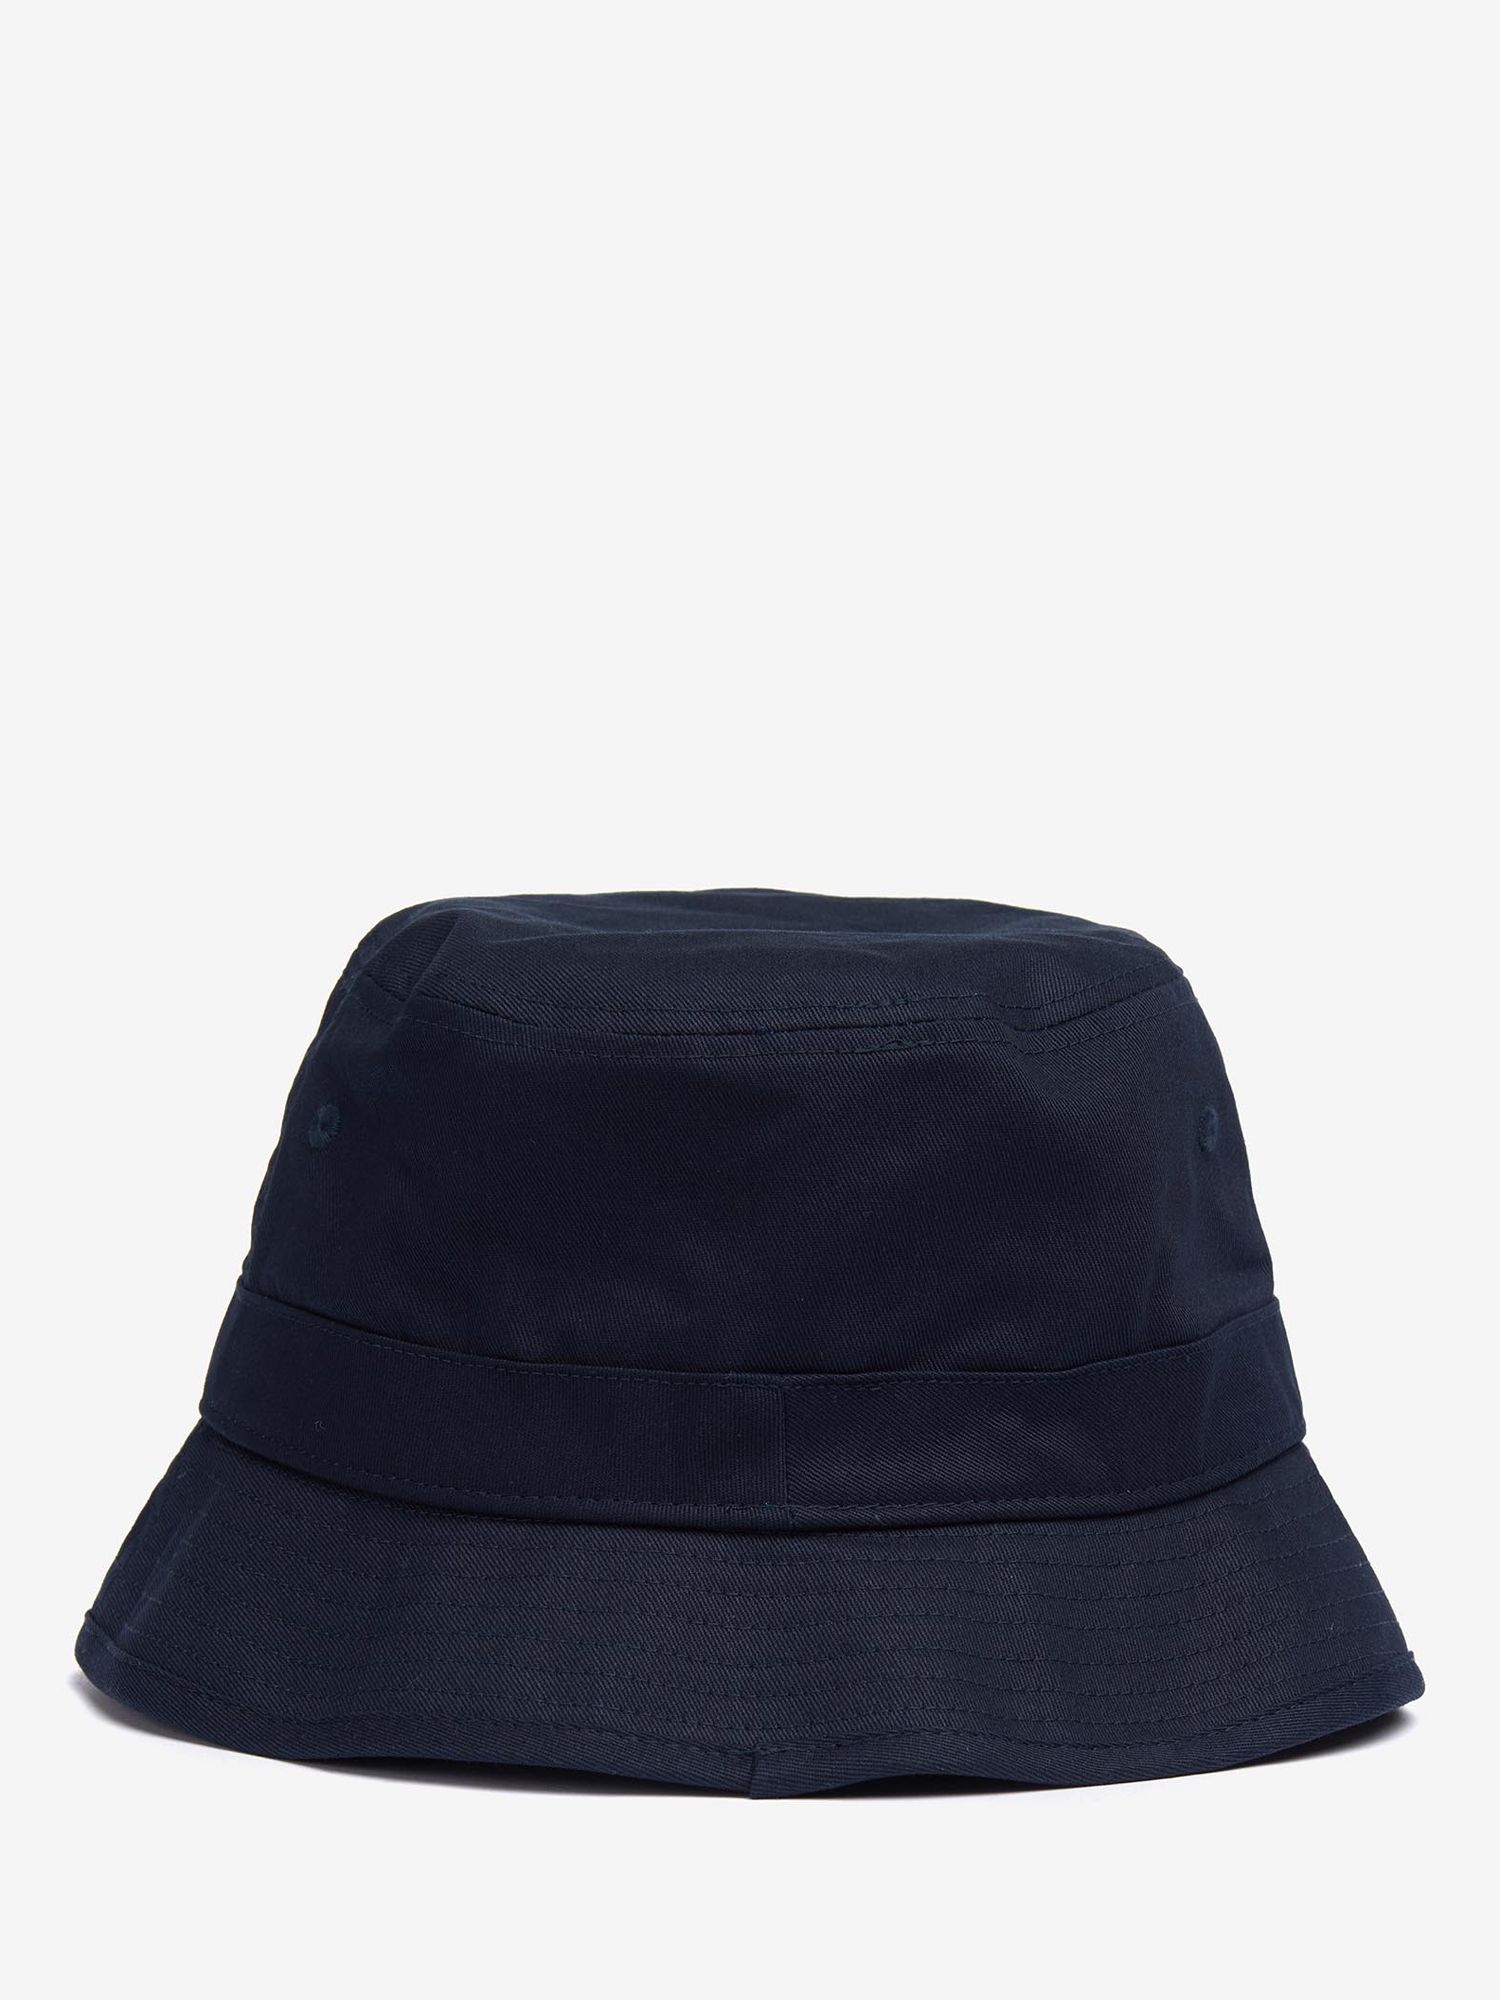 Barbour Classic Bucket Hat, Navy at John Lewis & Partners